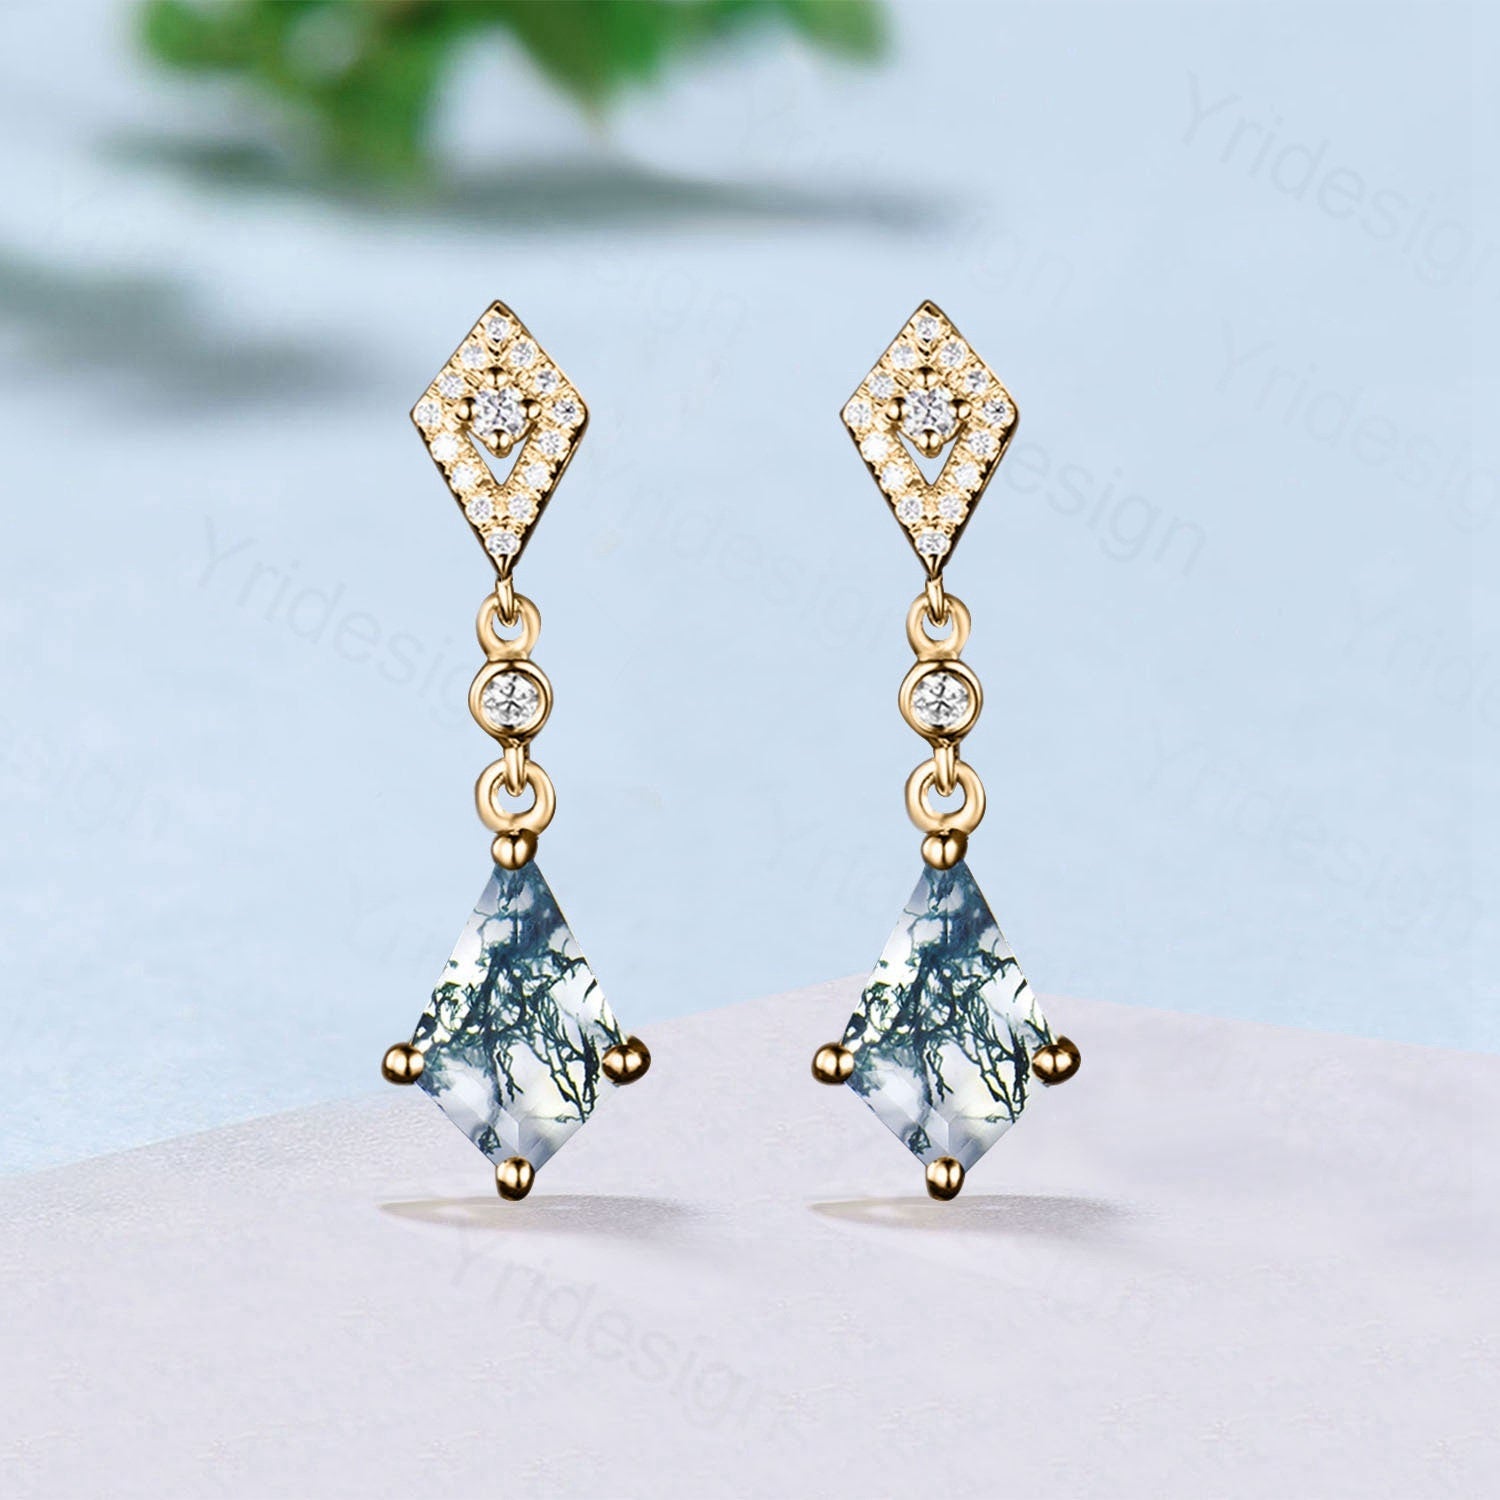 Traditional kite moss agate earrings white gold halo diamond drop stud earrings women vintage dainty green agate anniversary gift for her - PENFINE